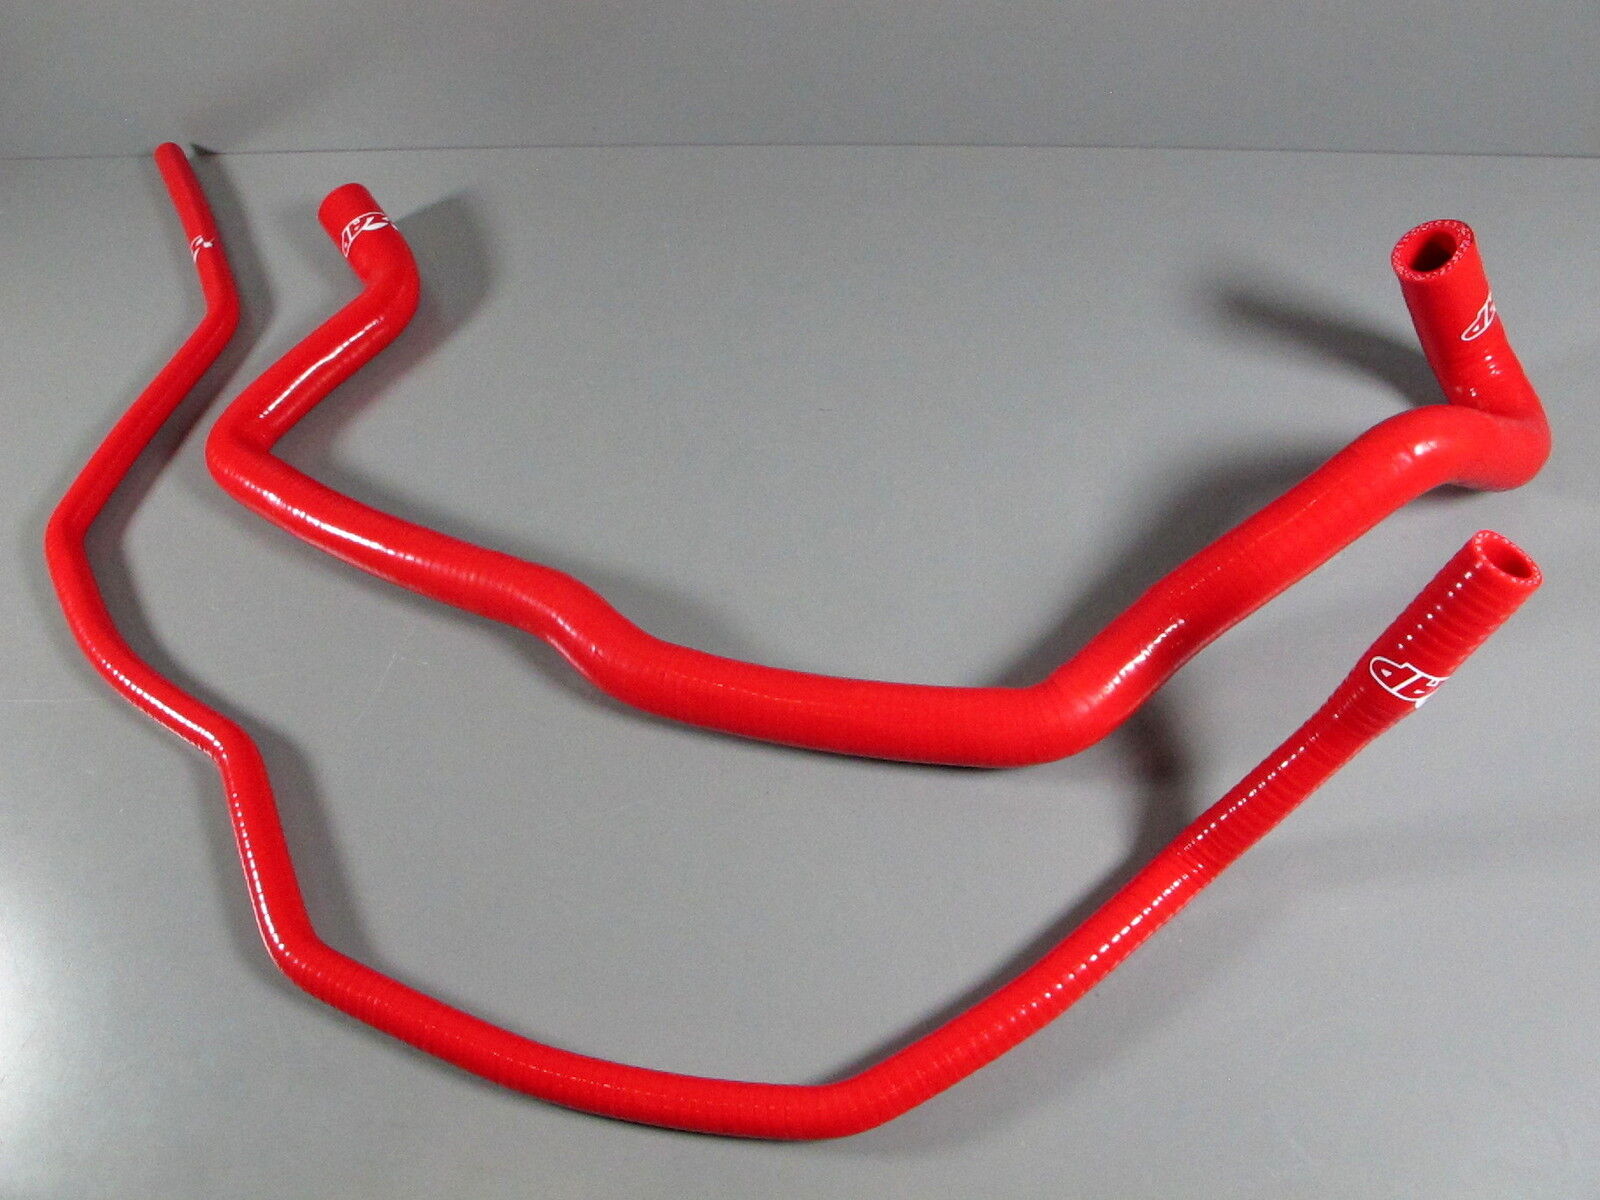 New For Renault 5GT Turbo Header Tank Silicone Hose Coolant Tube Red 1985-1996